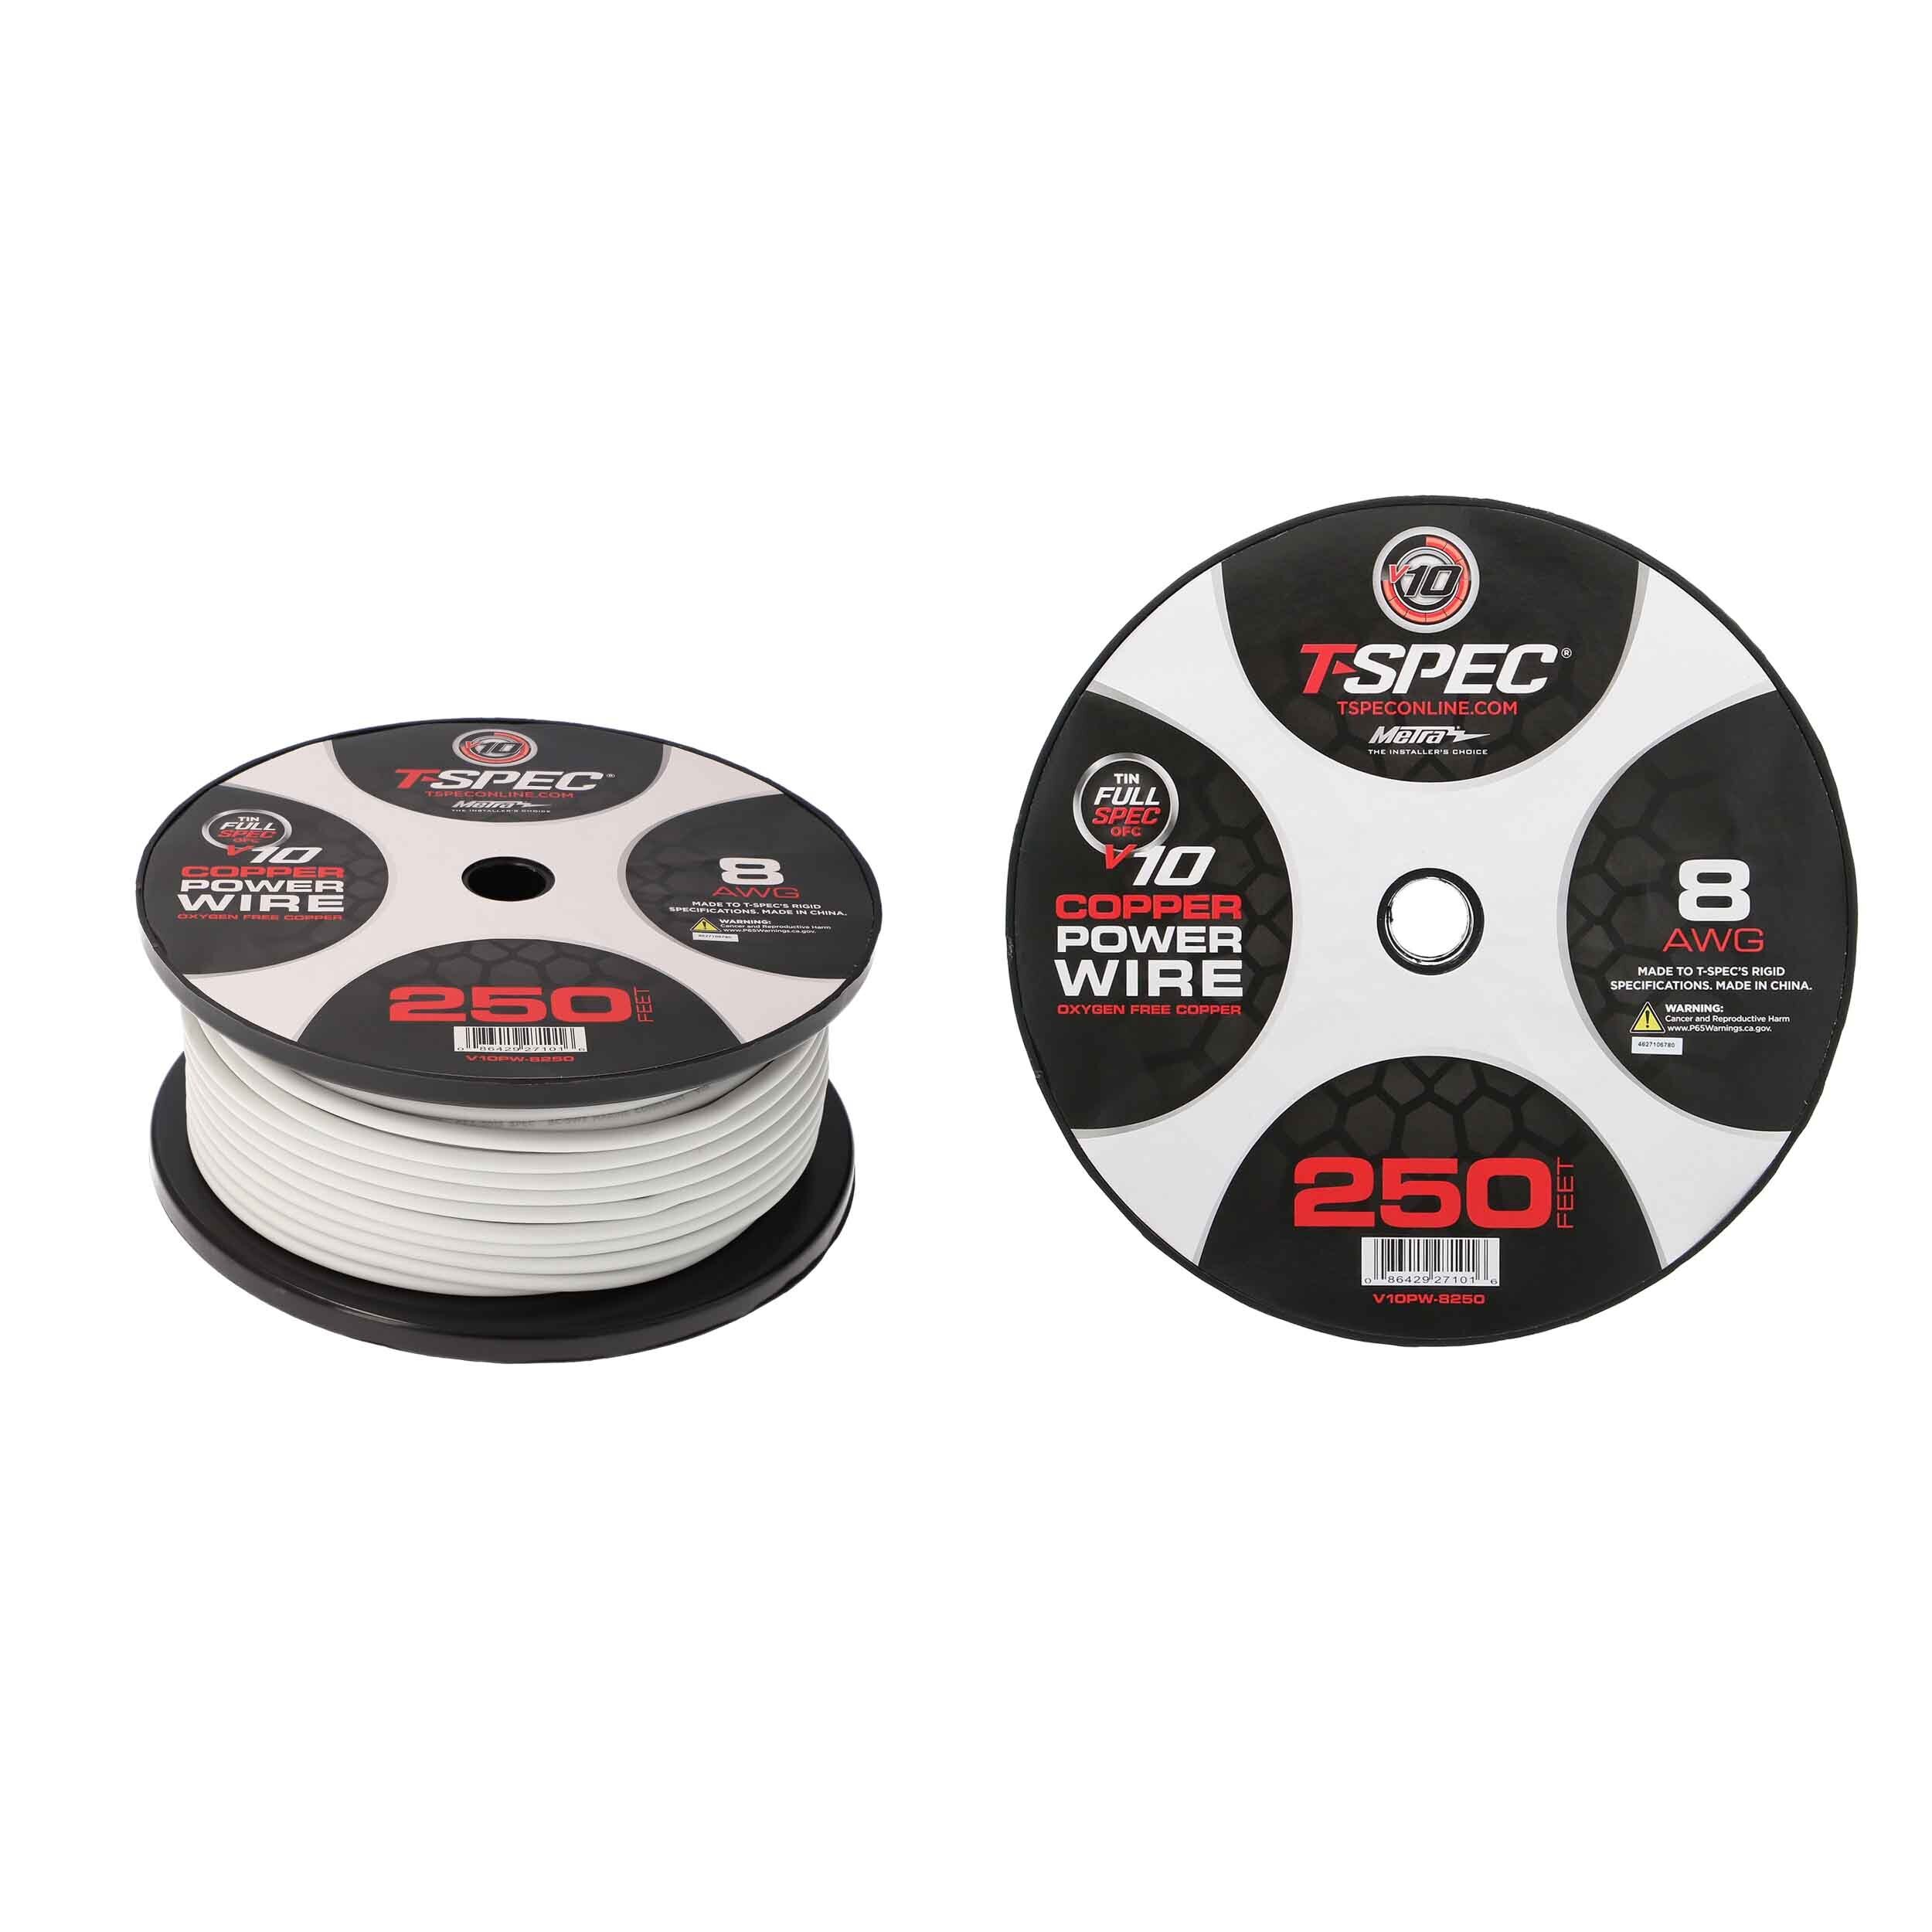 8 AWG 250FT MATTE PEARL OFC POWER WIRE - v10 SERIES